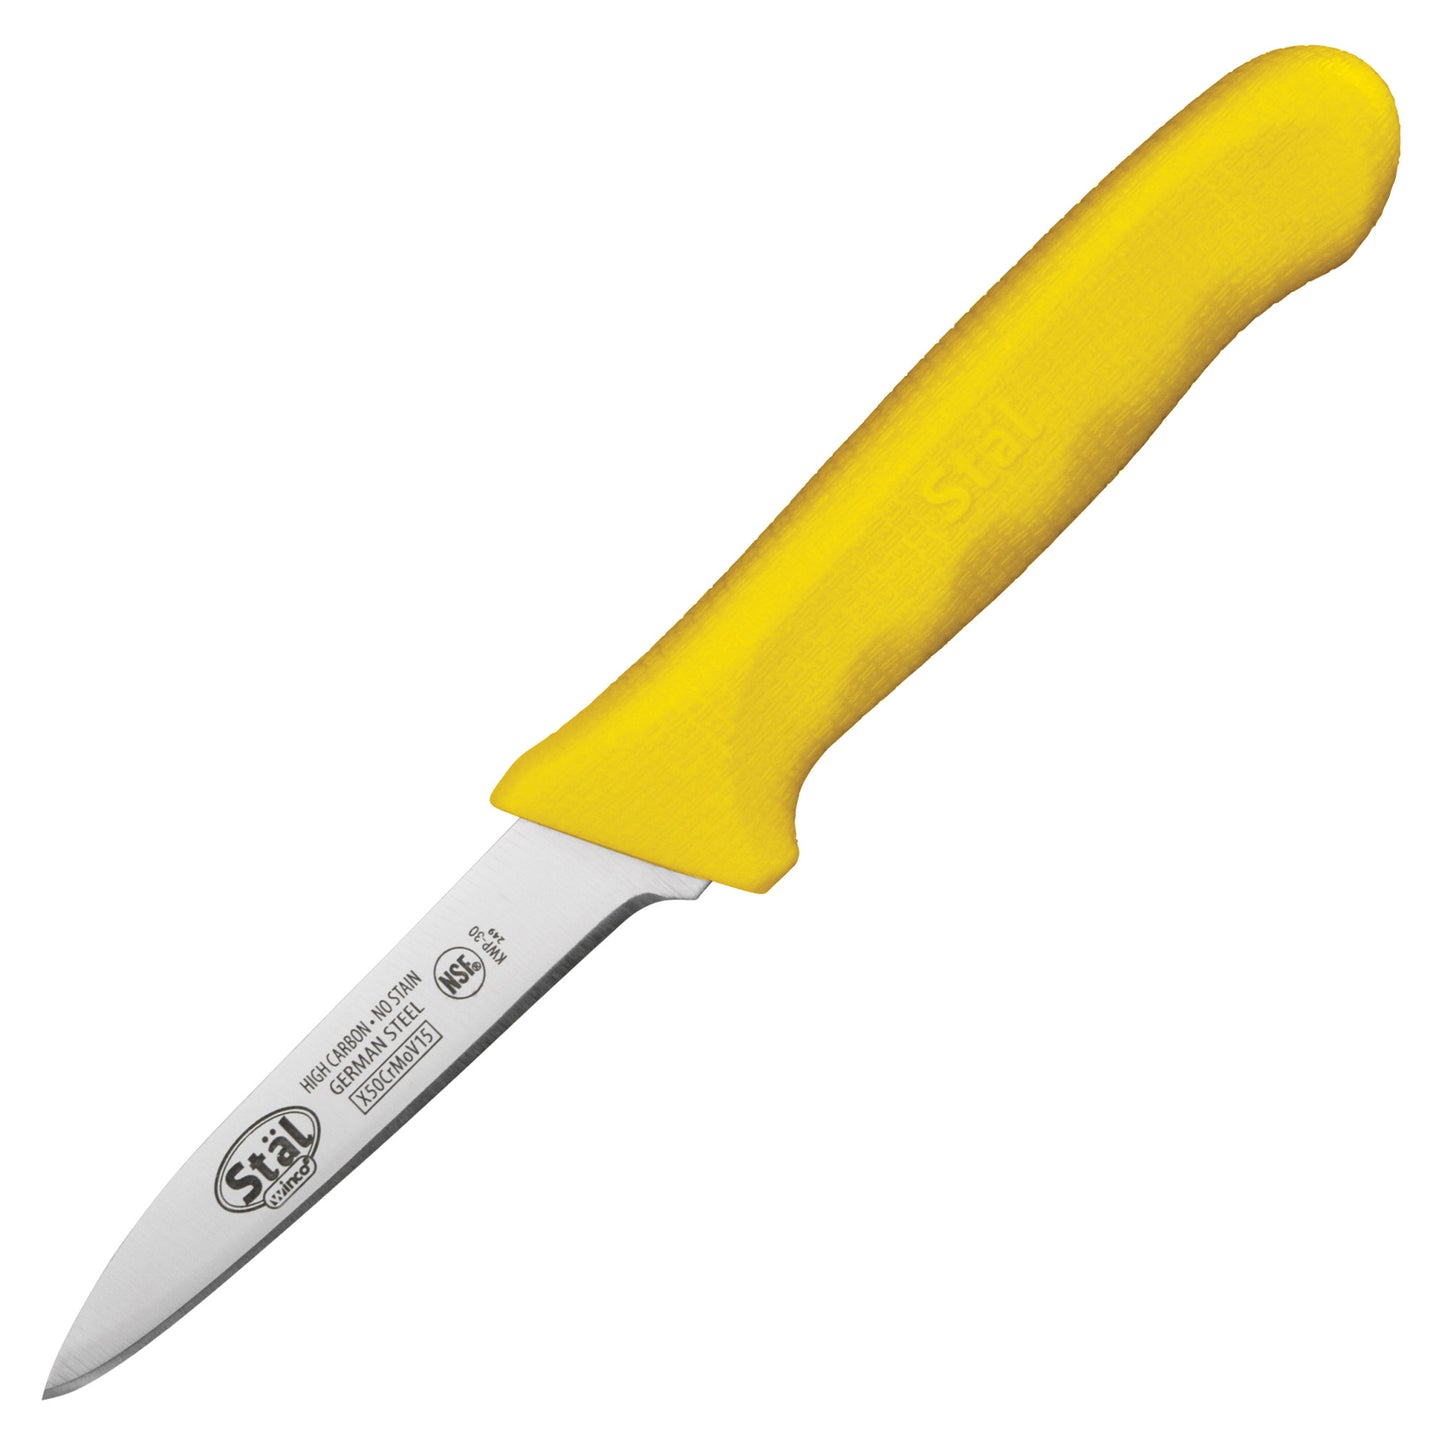 KWP-30Y - Stäl 3-1/4" Paring Knife, 2 per Pack - Yellow